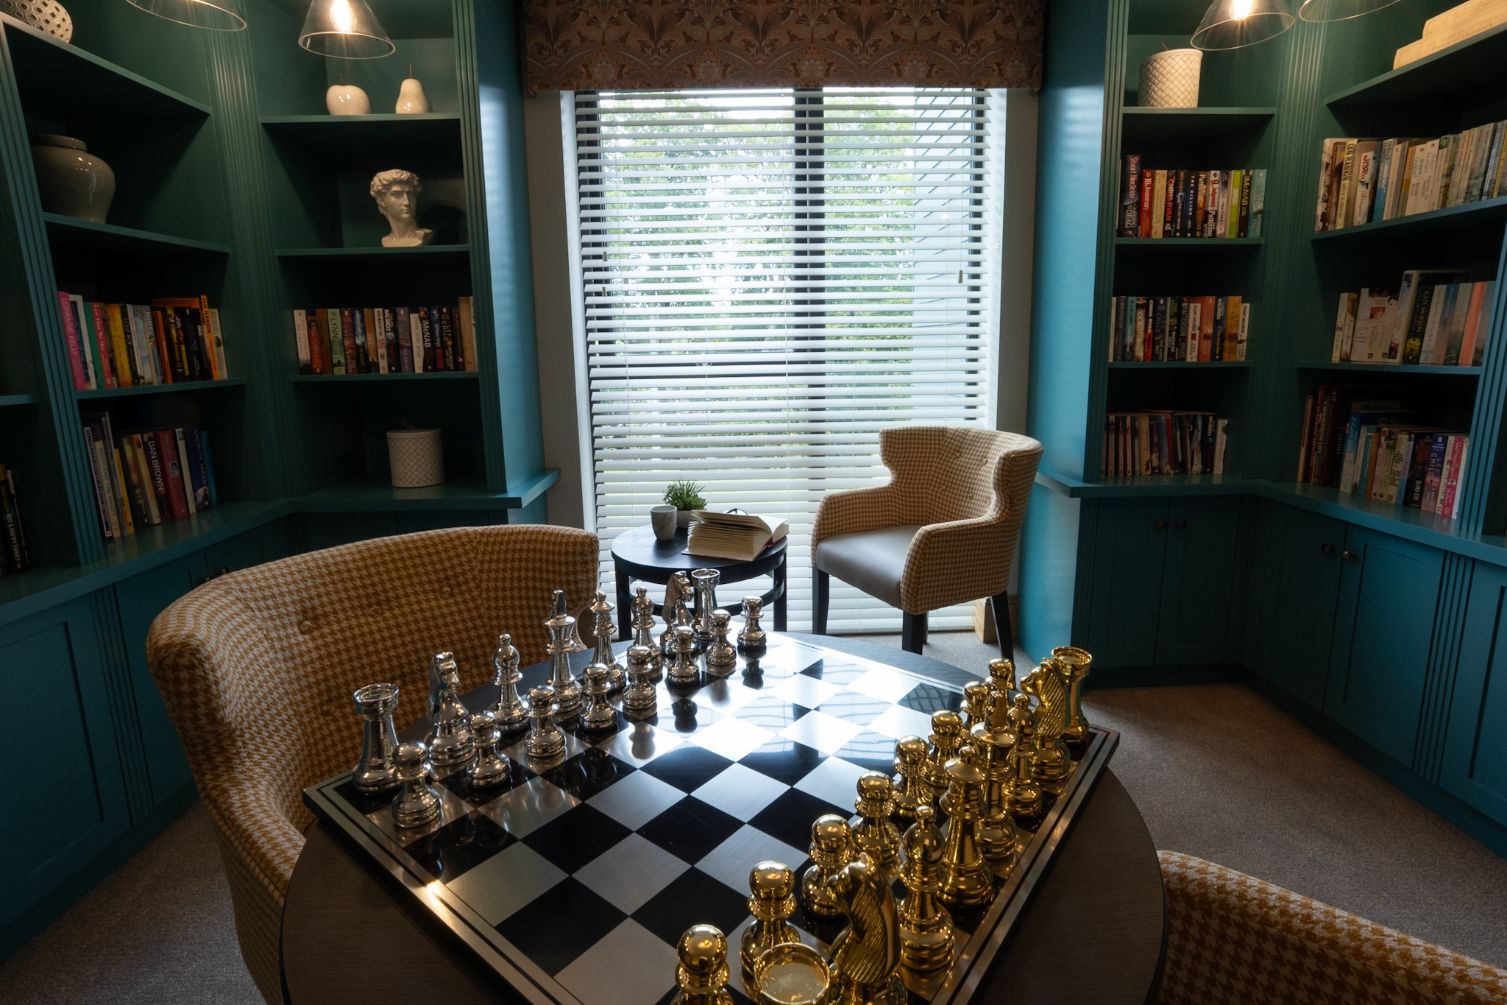 Library with Chess Piece on Table